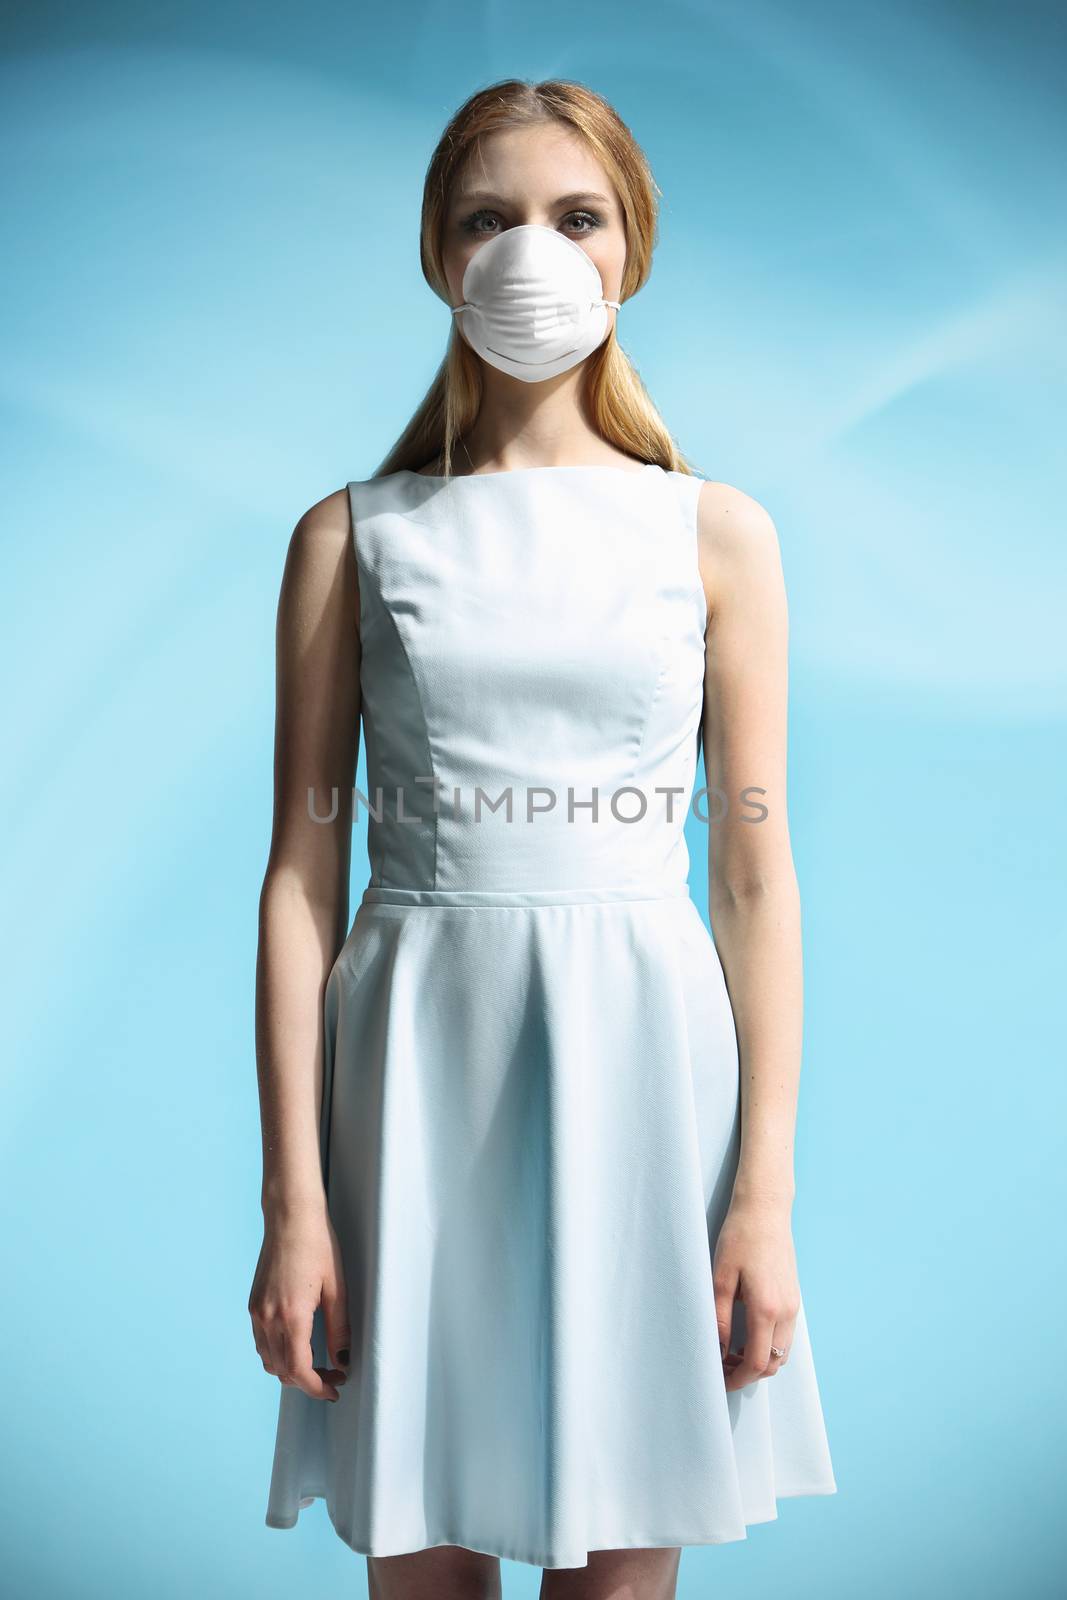 Beautiful girl in a white dress with a respiratory mask on her face